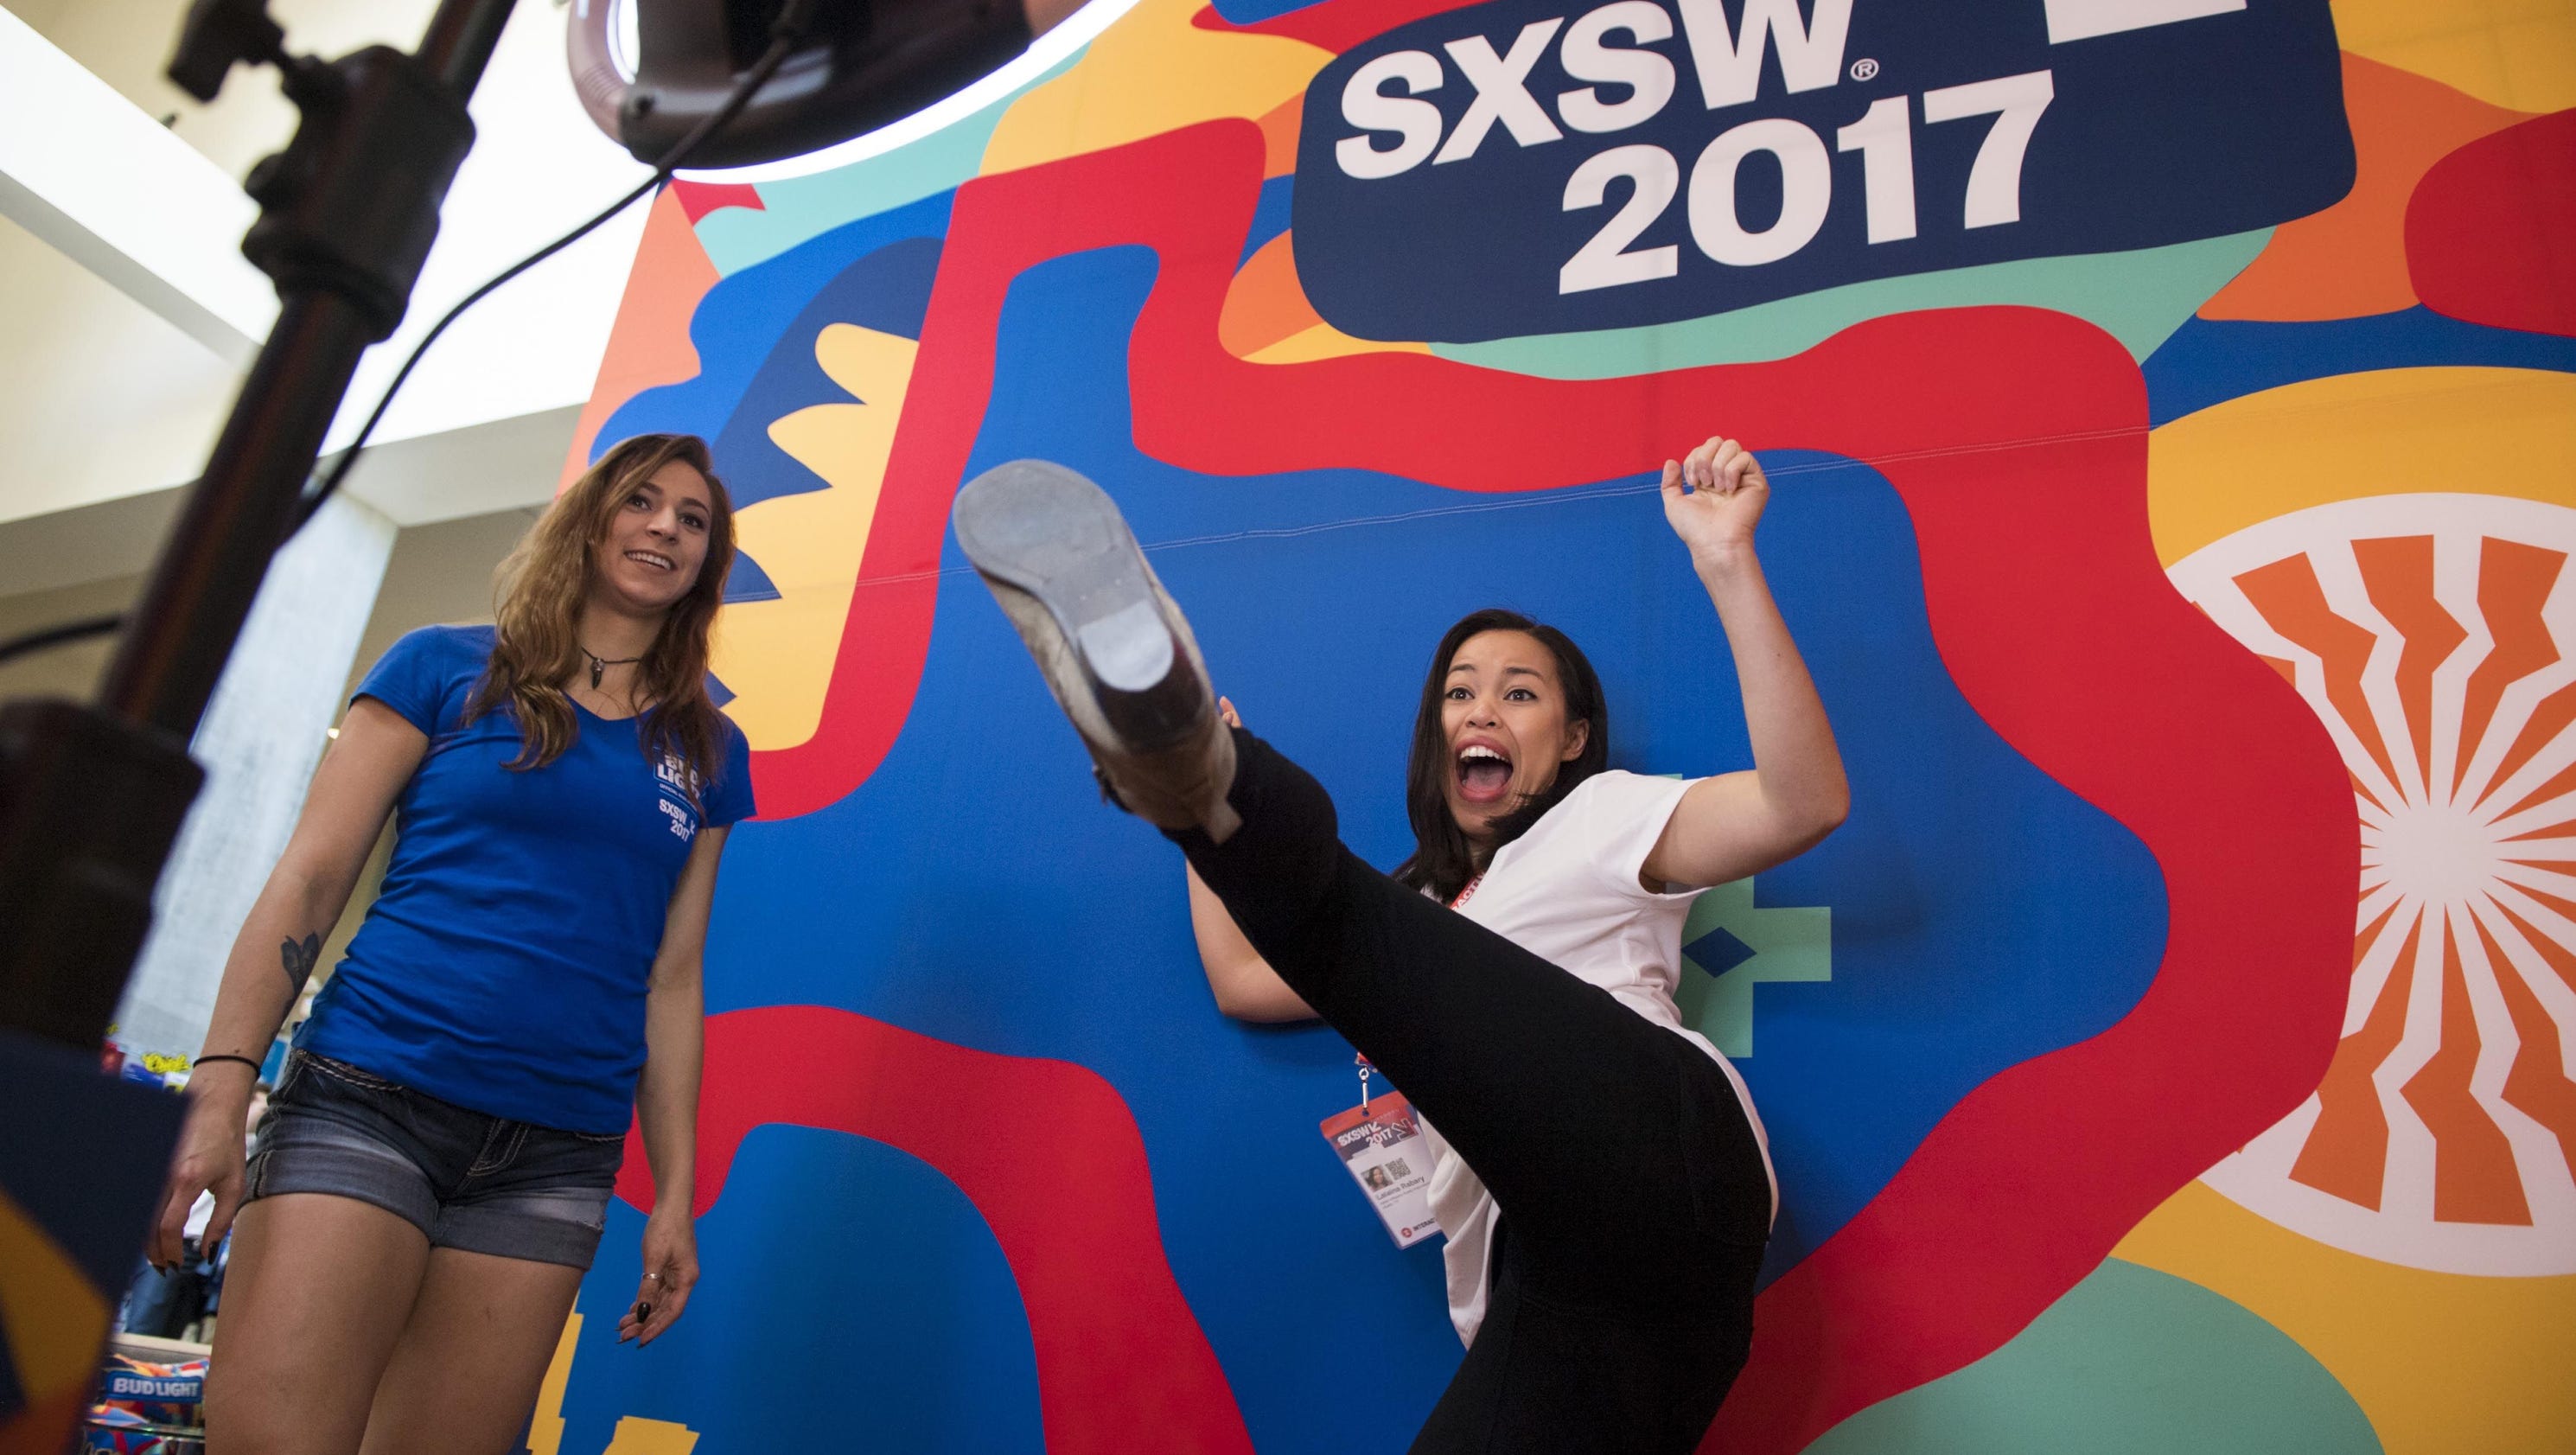 How to avoid the marketing hype at SXSW3200 x 1680